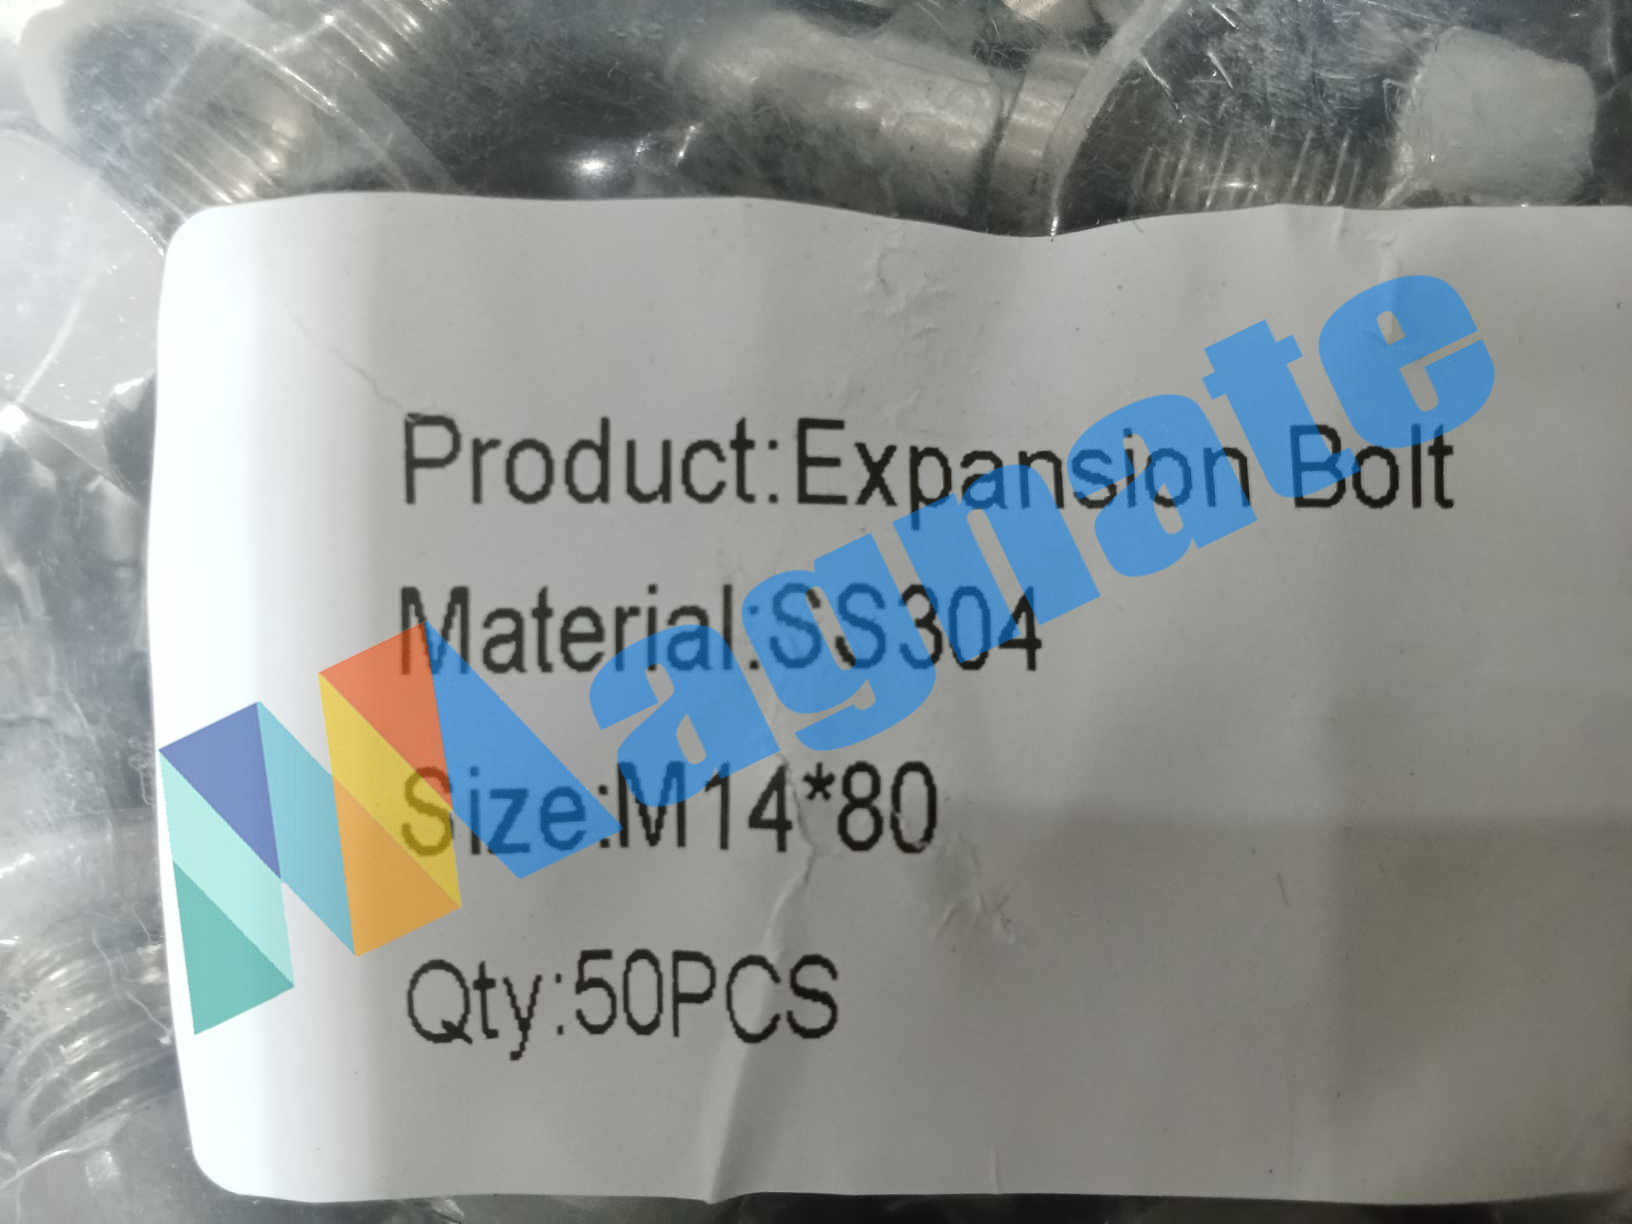 Expansion Bolt Material: SS304 Size: M14*80